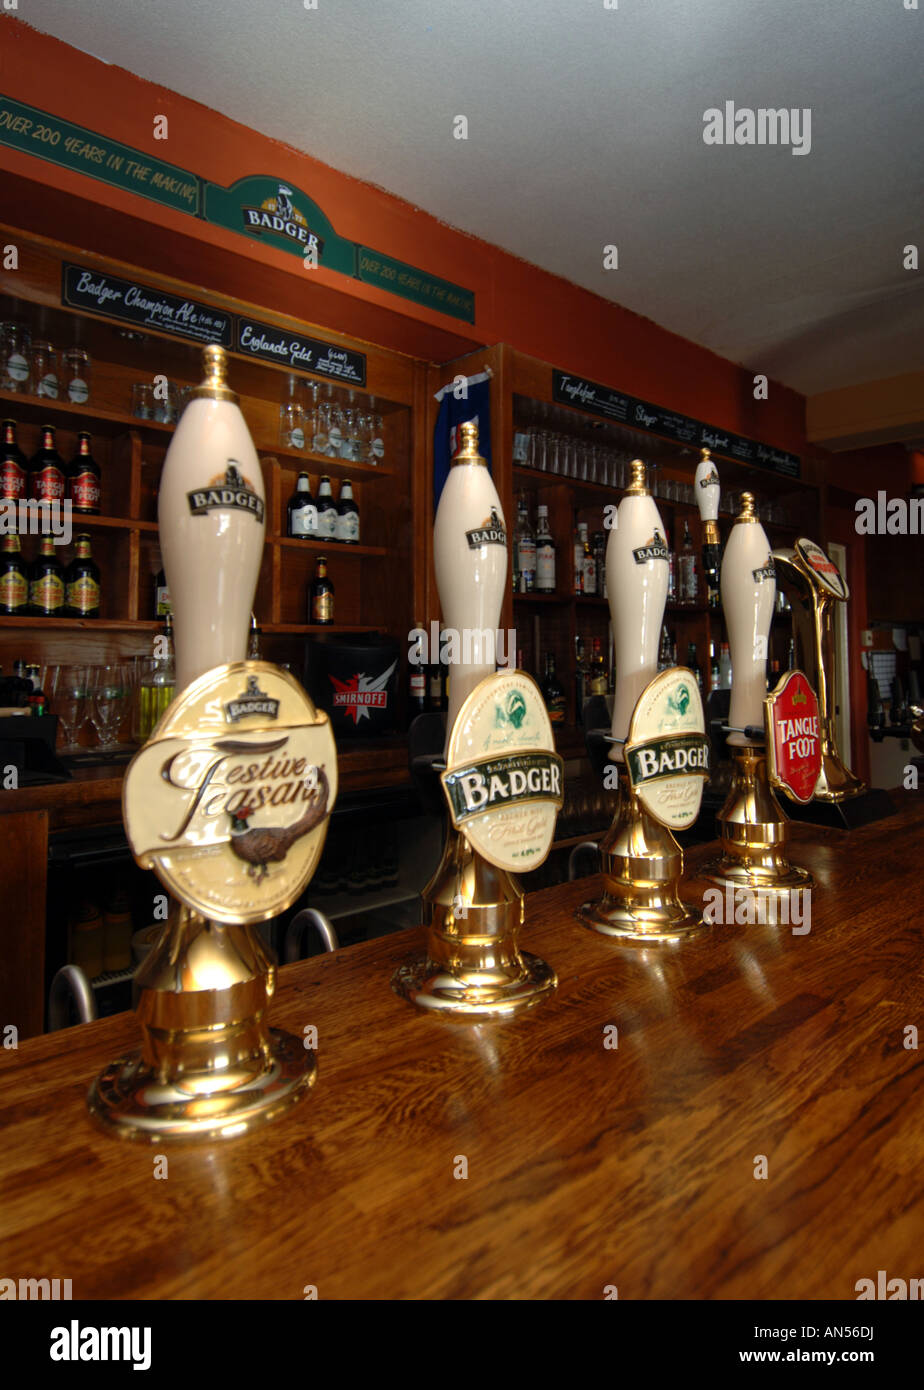 Real Ale pumps in an English pub Stock Photo - Alamy